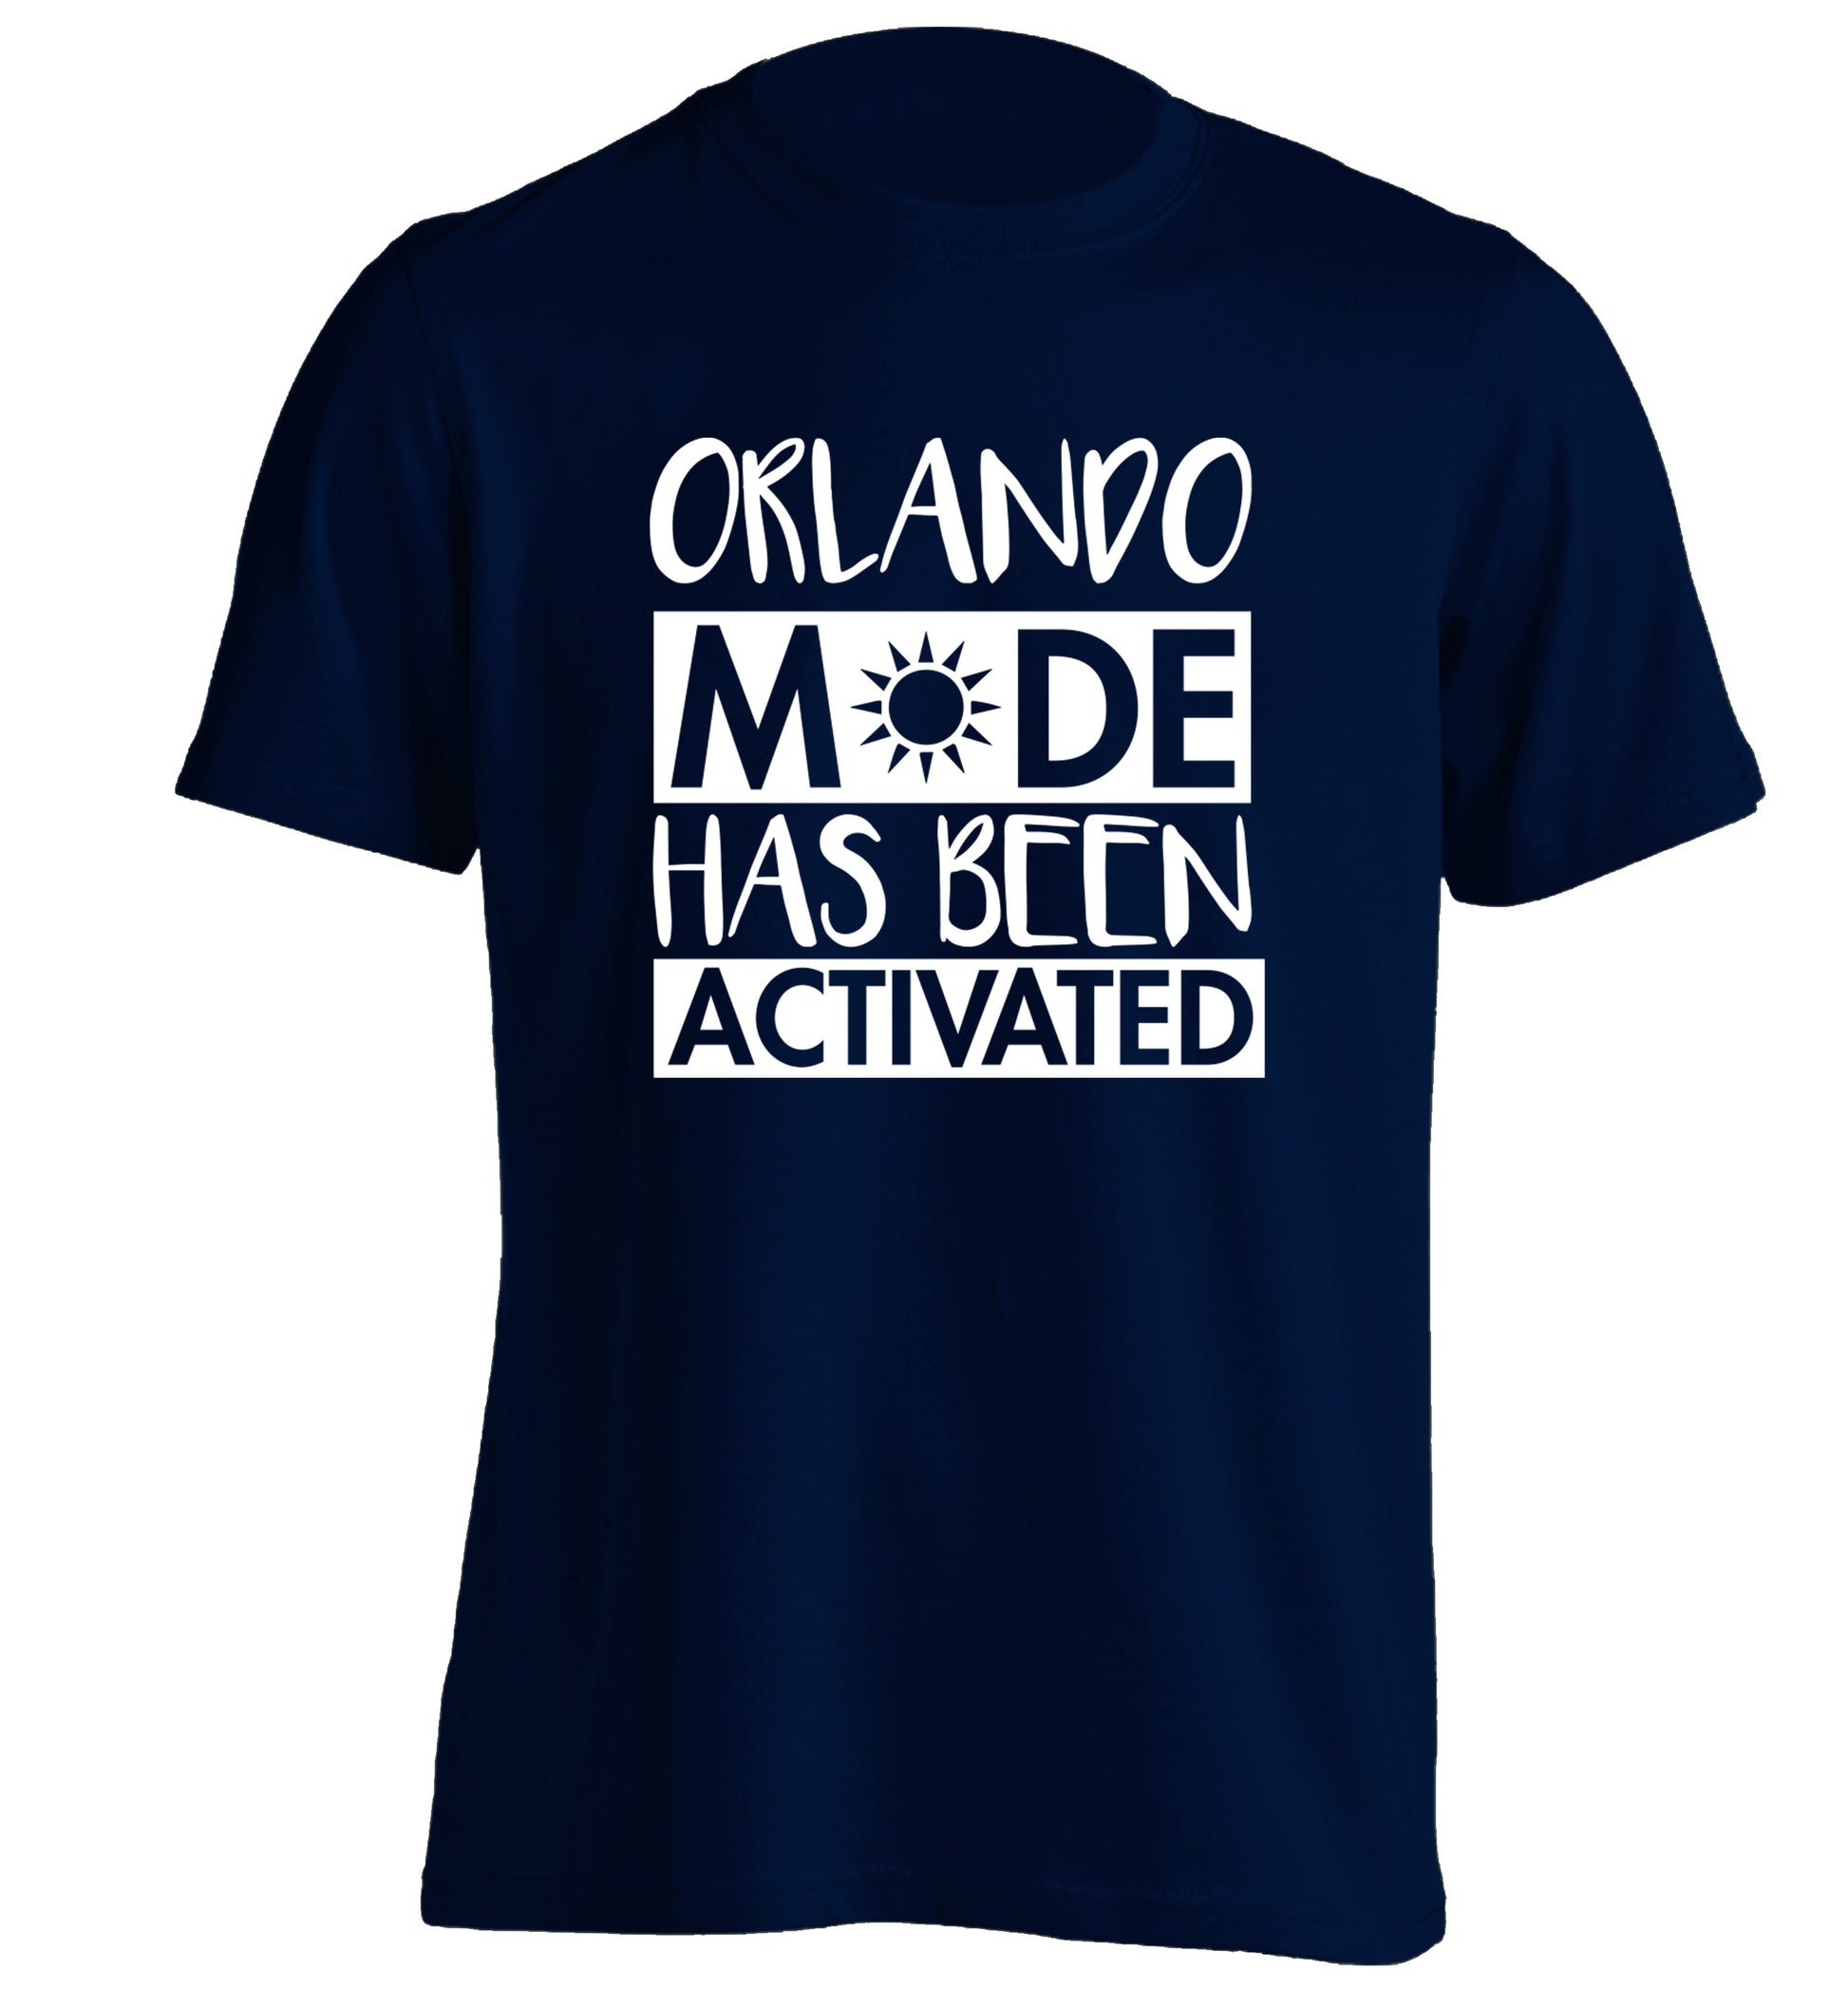 Orlando mode has been activated adults unisex navy Tshirt 2XL